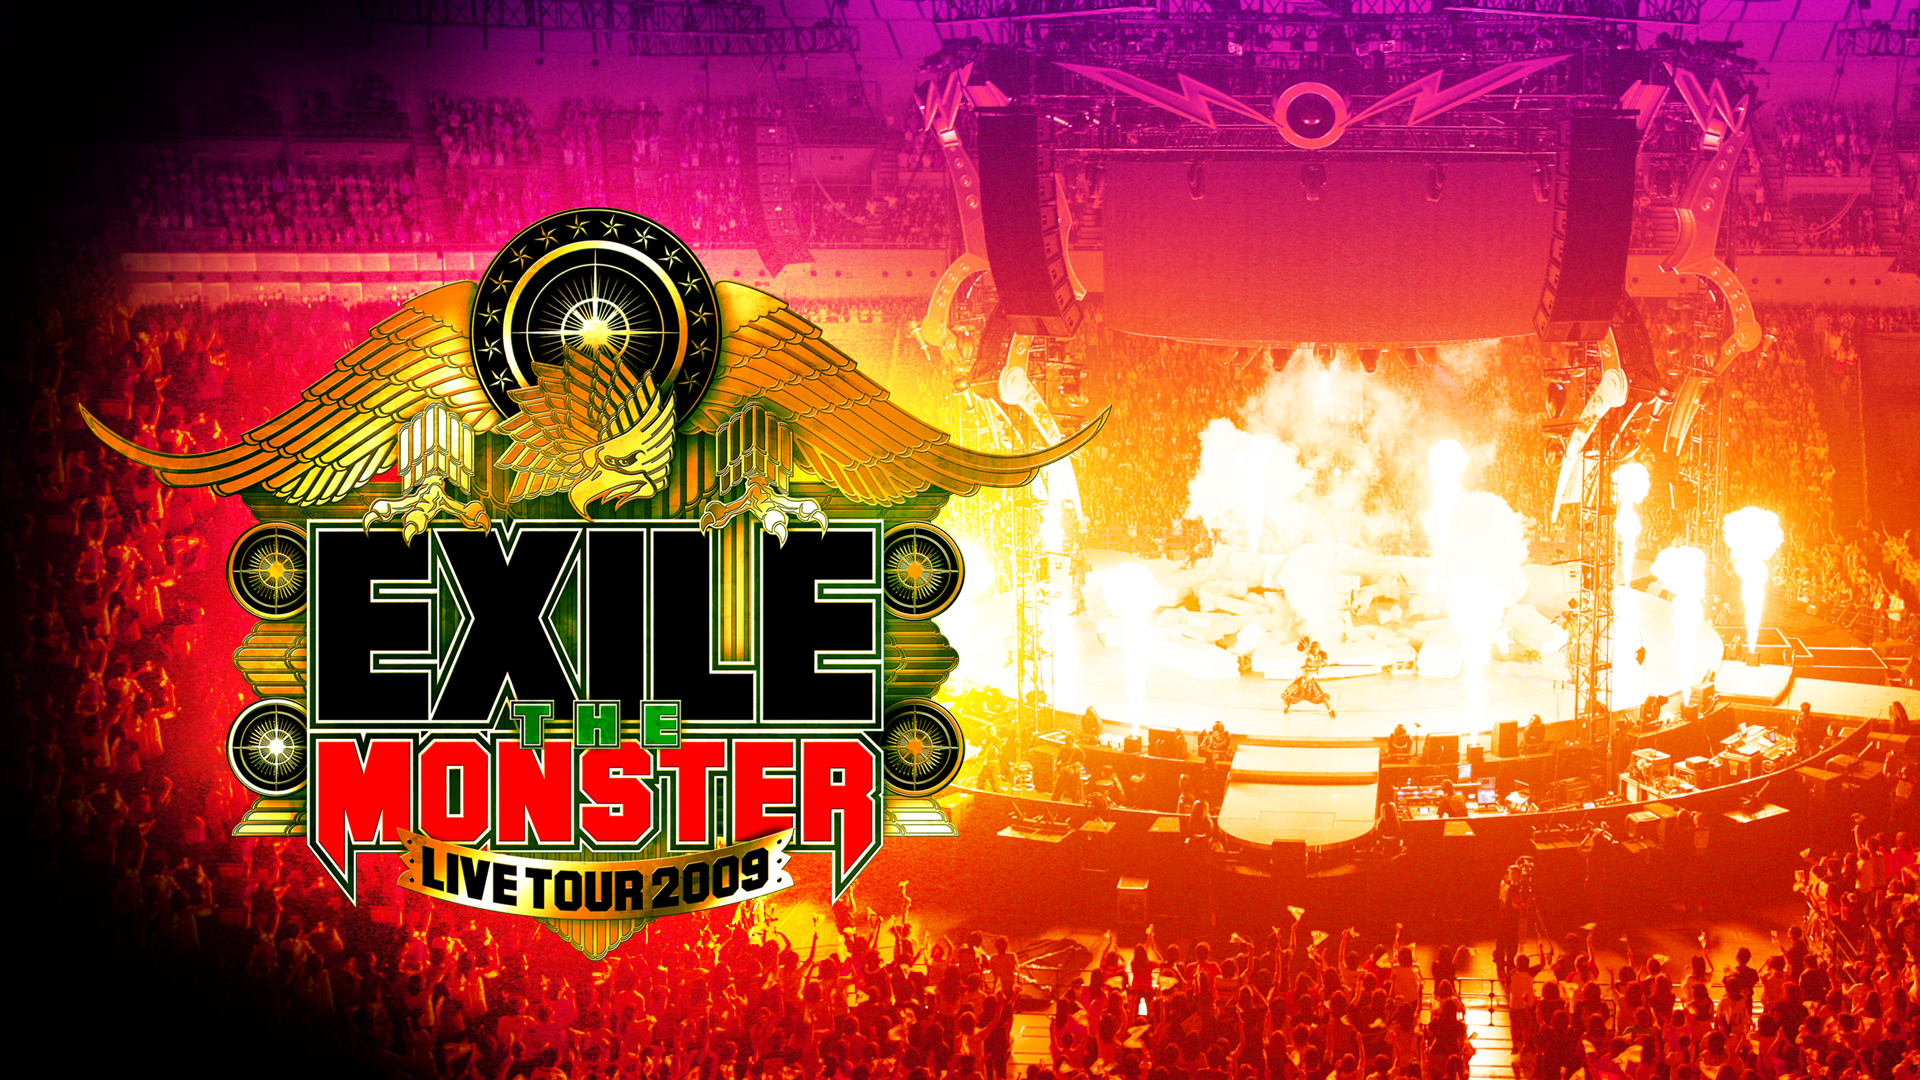 EXILE LIVE TOUR 2009 “THE MONSTER”(音楽・アイドル / 2009) - 動画 